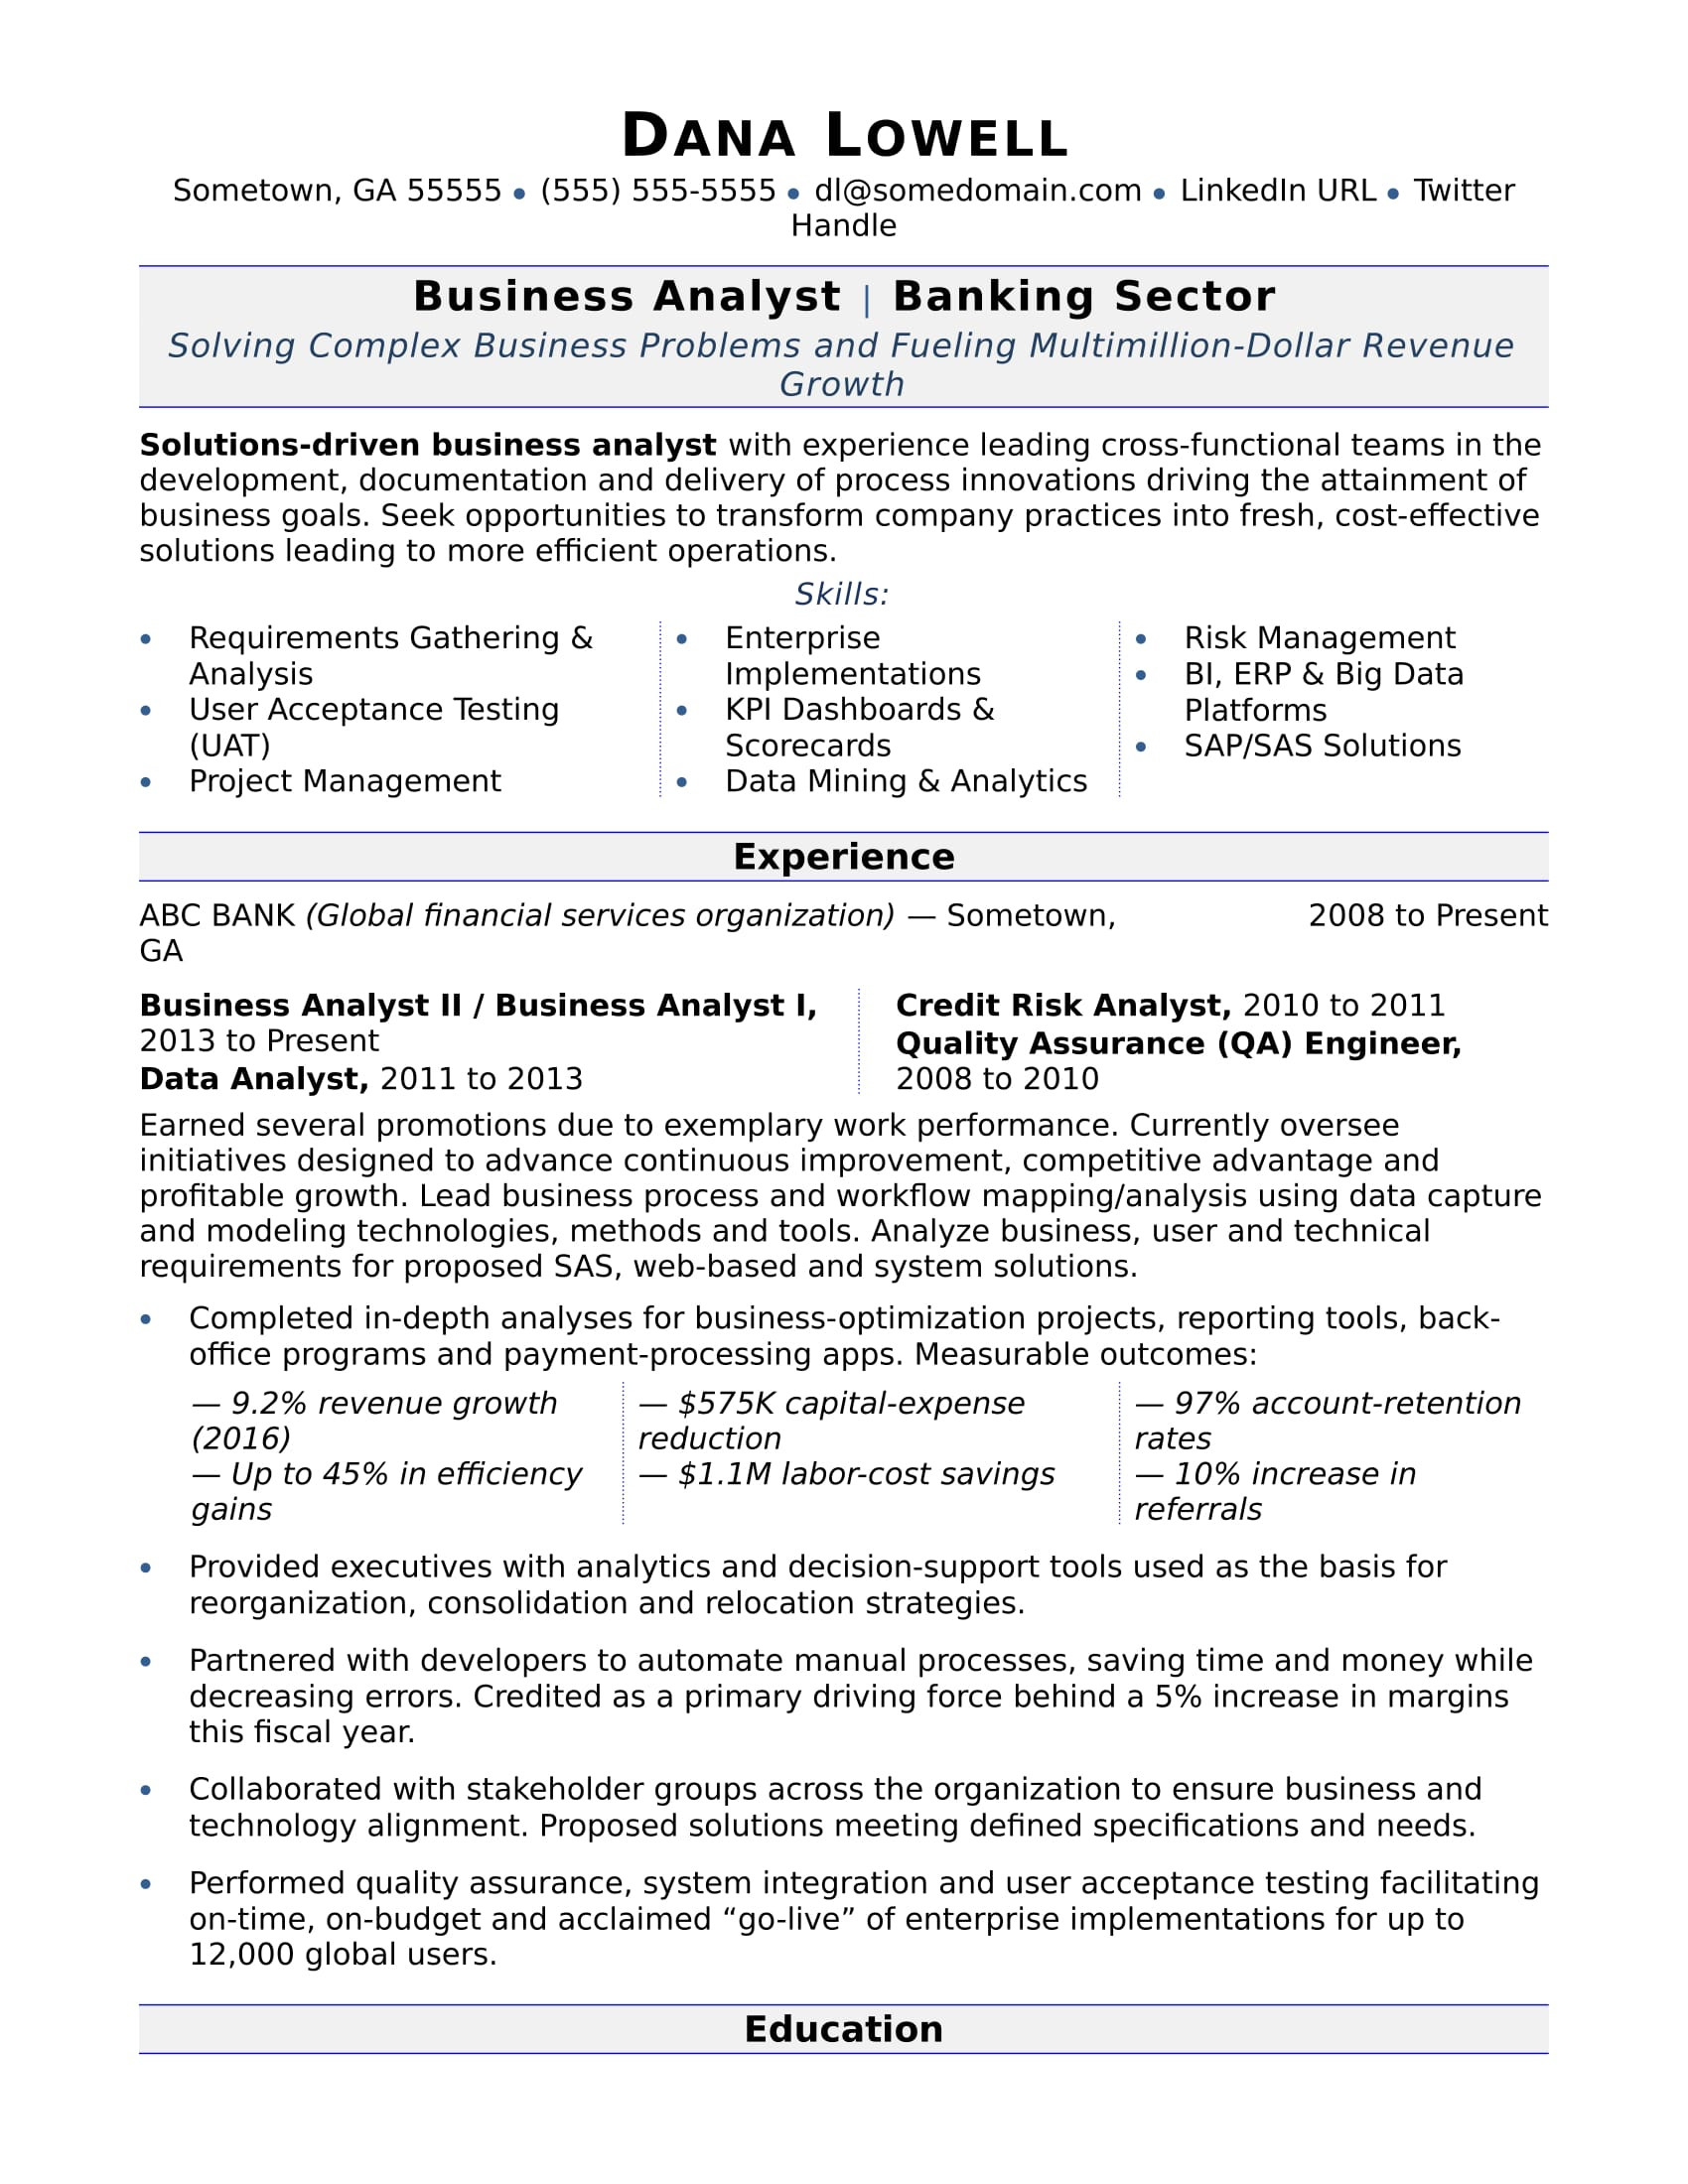 Instructional Systems Specialist Federal Resume Sample with Salary and Hours Business Analyst Resume Monster.com